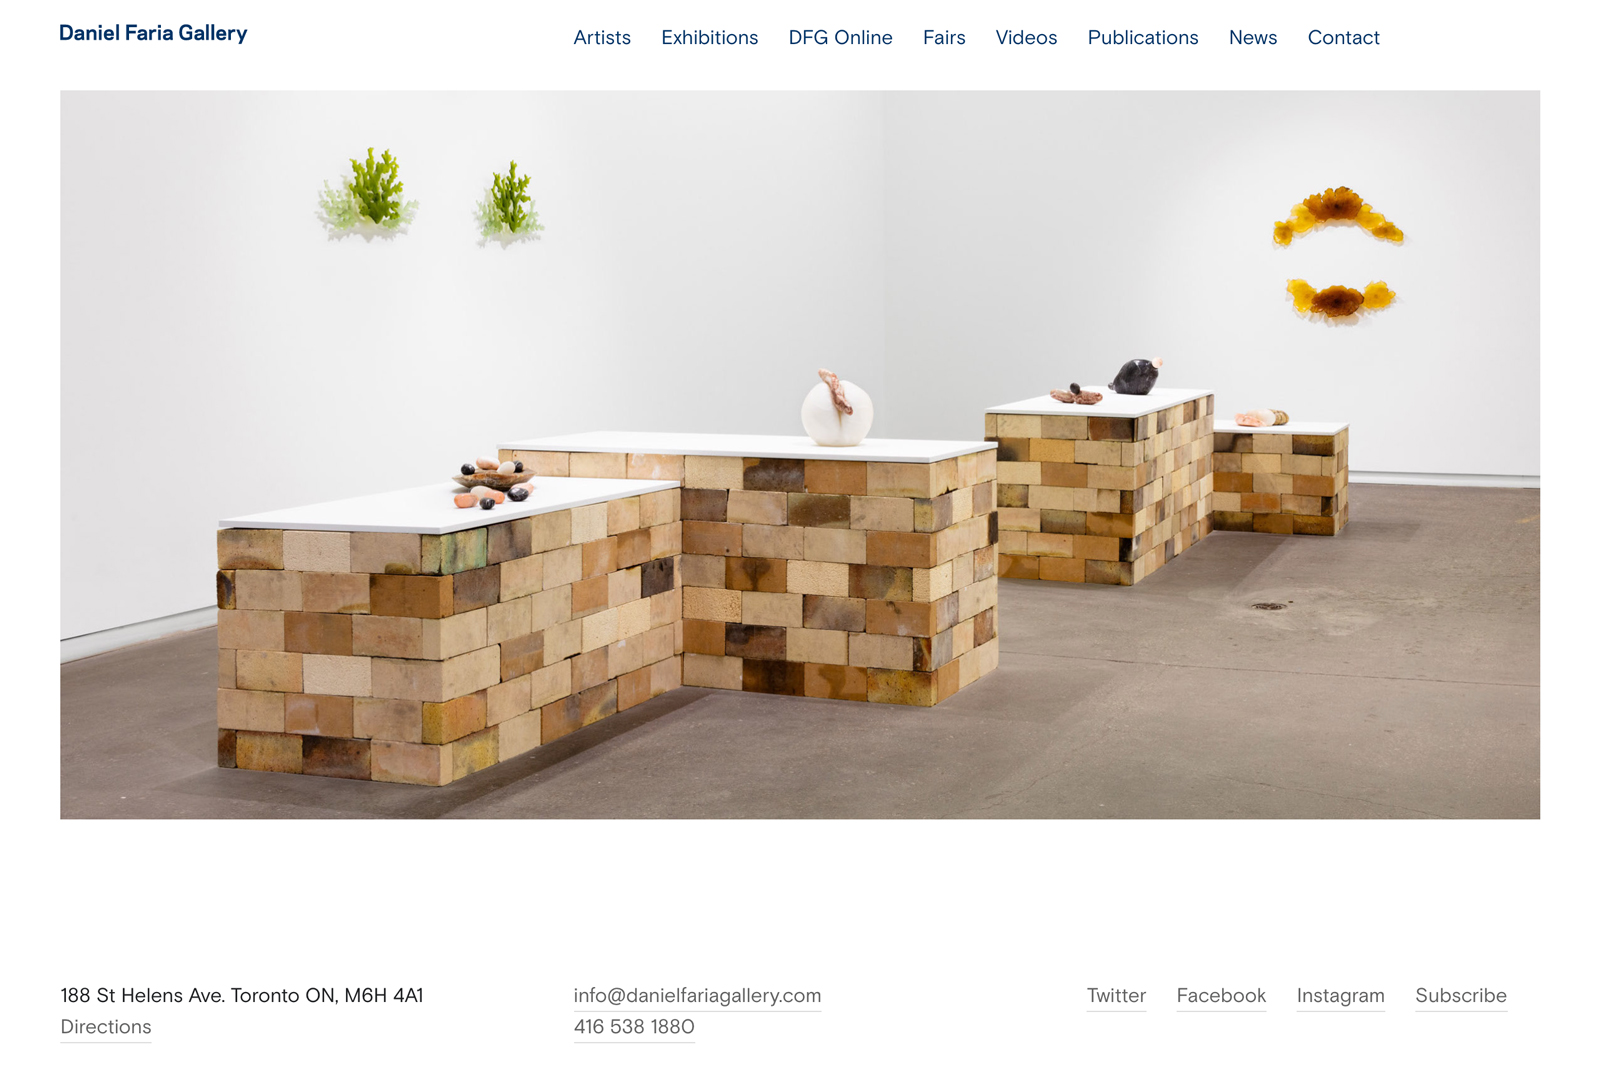 Daniel Faria Gallery’s homepage showing a large image from the current exhibition.